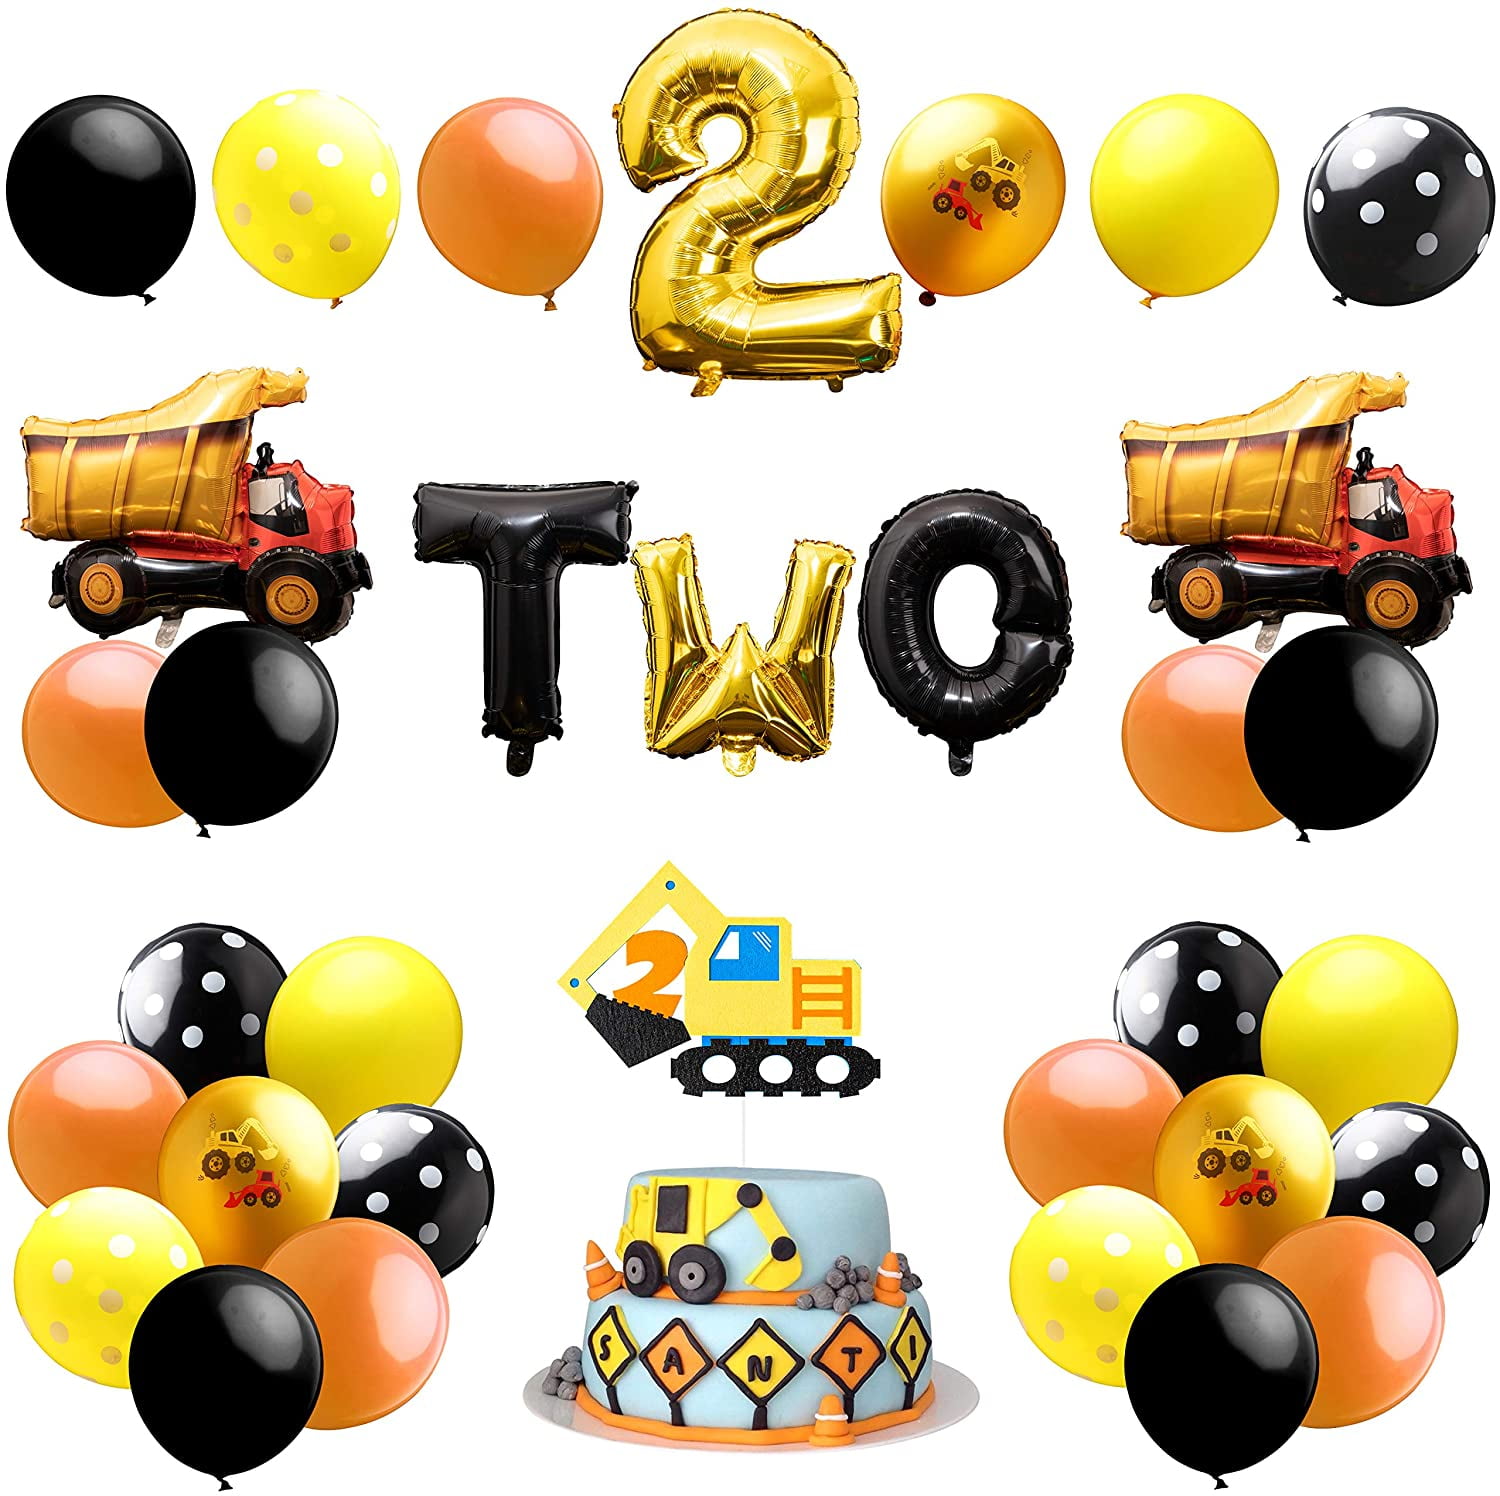 Digger Birthday Decorations for Boys Birthday Construction Party Supplies Construction Birthday Decorations 2nd Birthday Decorations Boy Construction Balloons with Happy Birthday Vehicle Banner